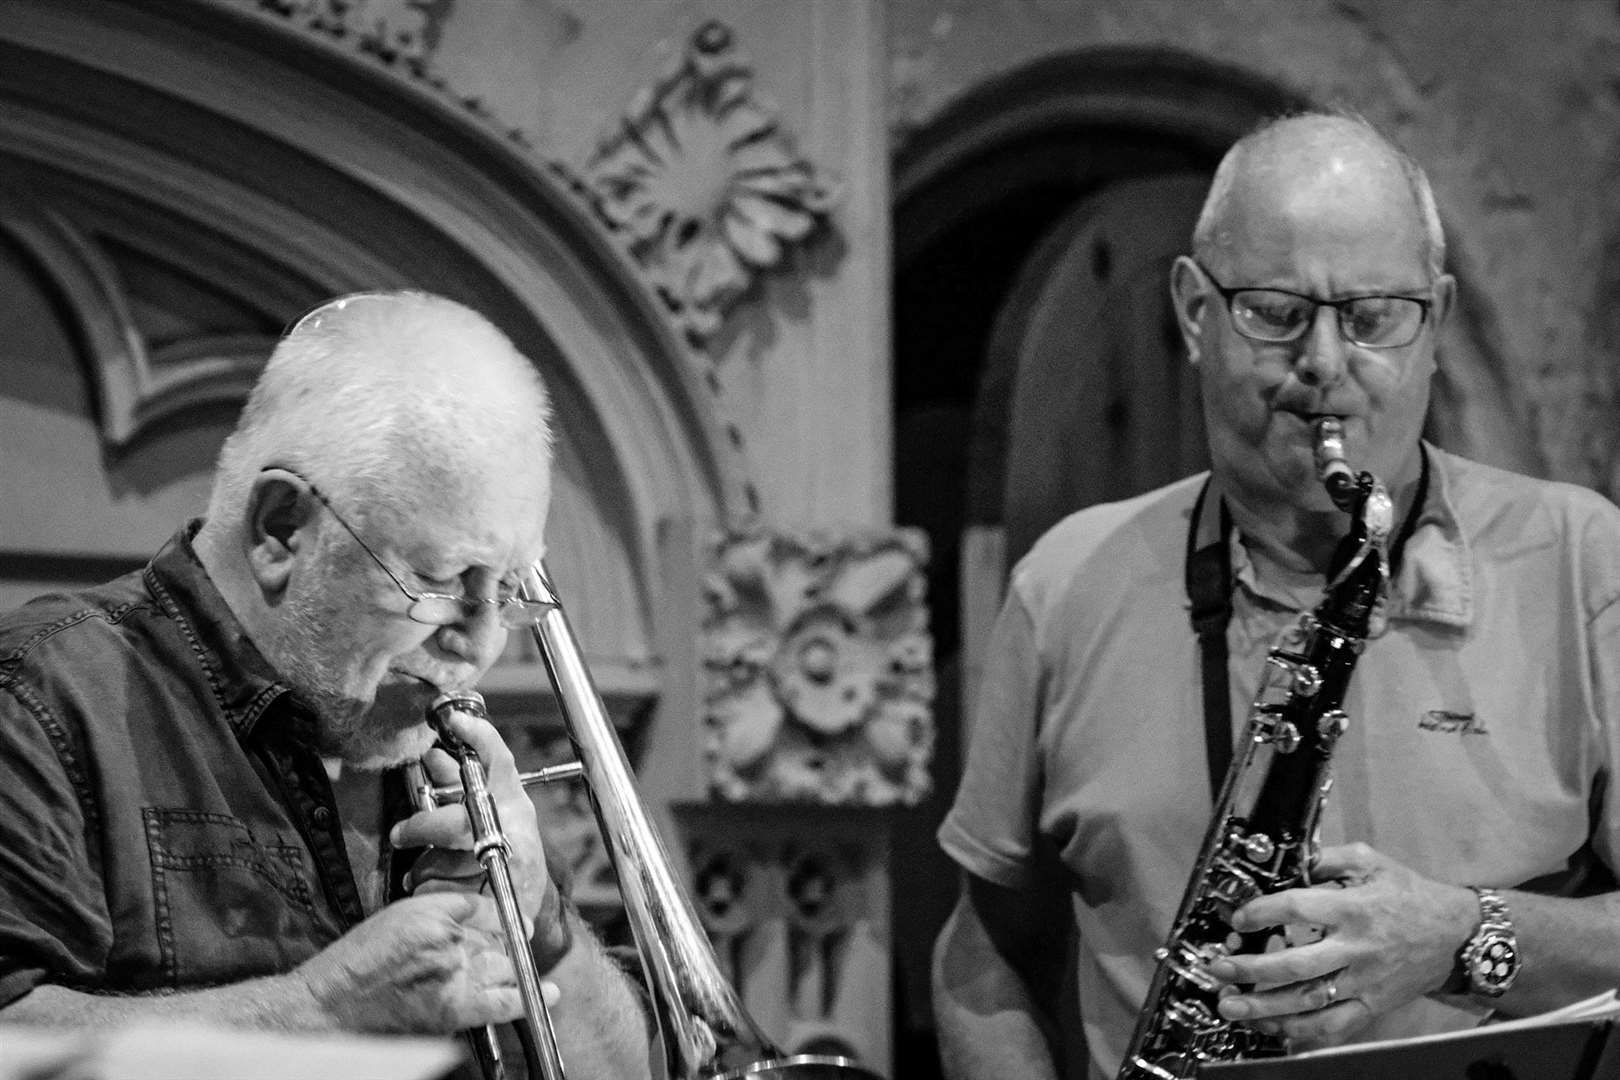 City Jazz play in the Ancient Collegiate Church in Tain. Picture: Mark Janes